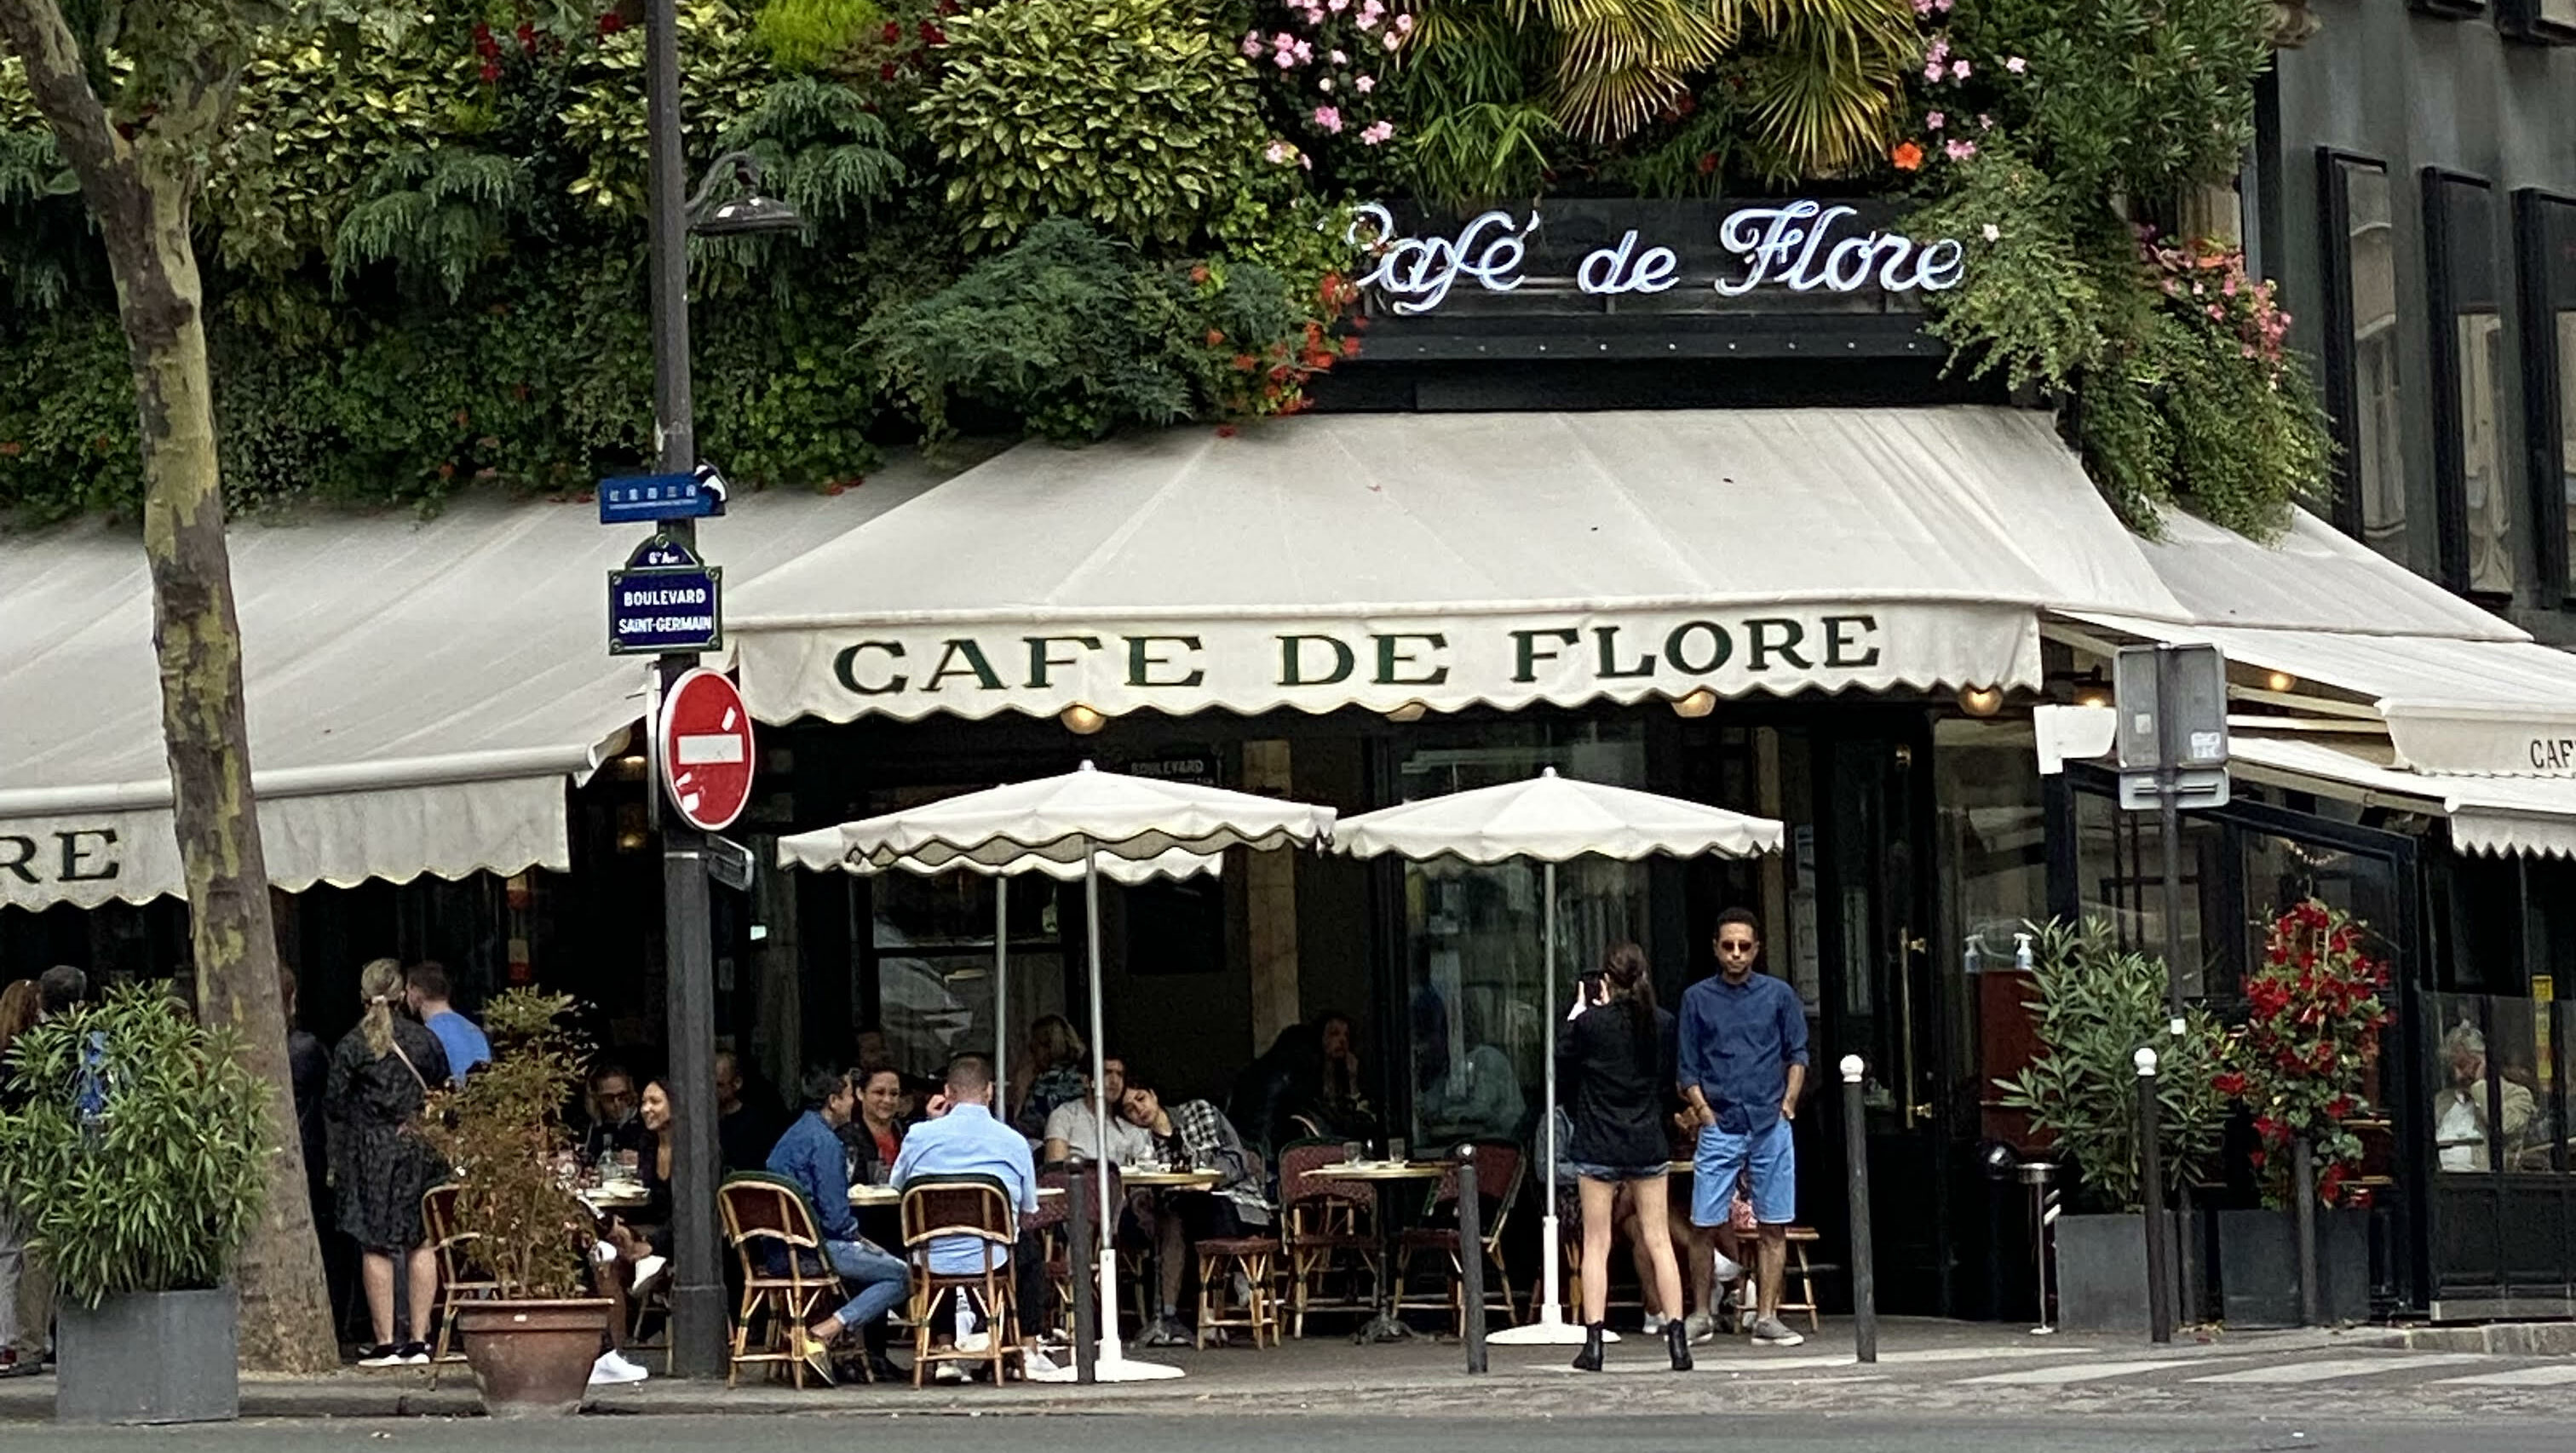 The Café de Flore is quite busy on a normal day.